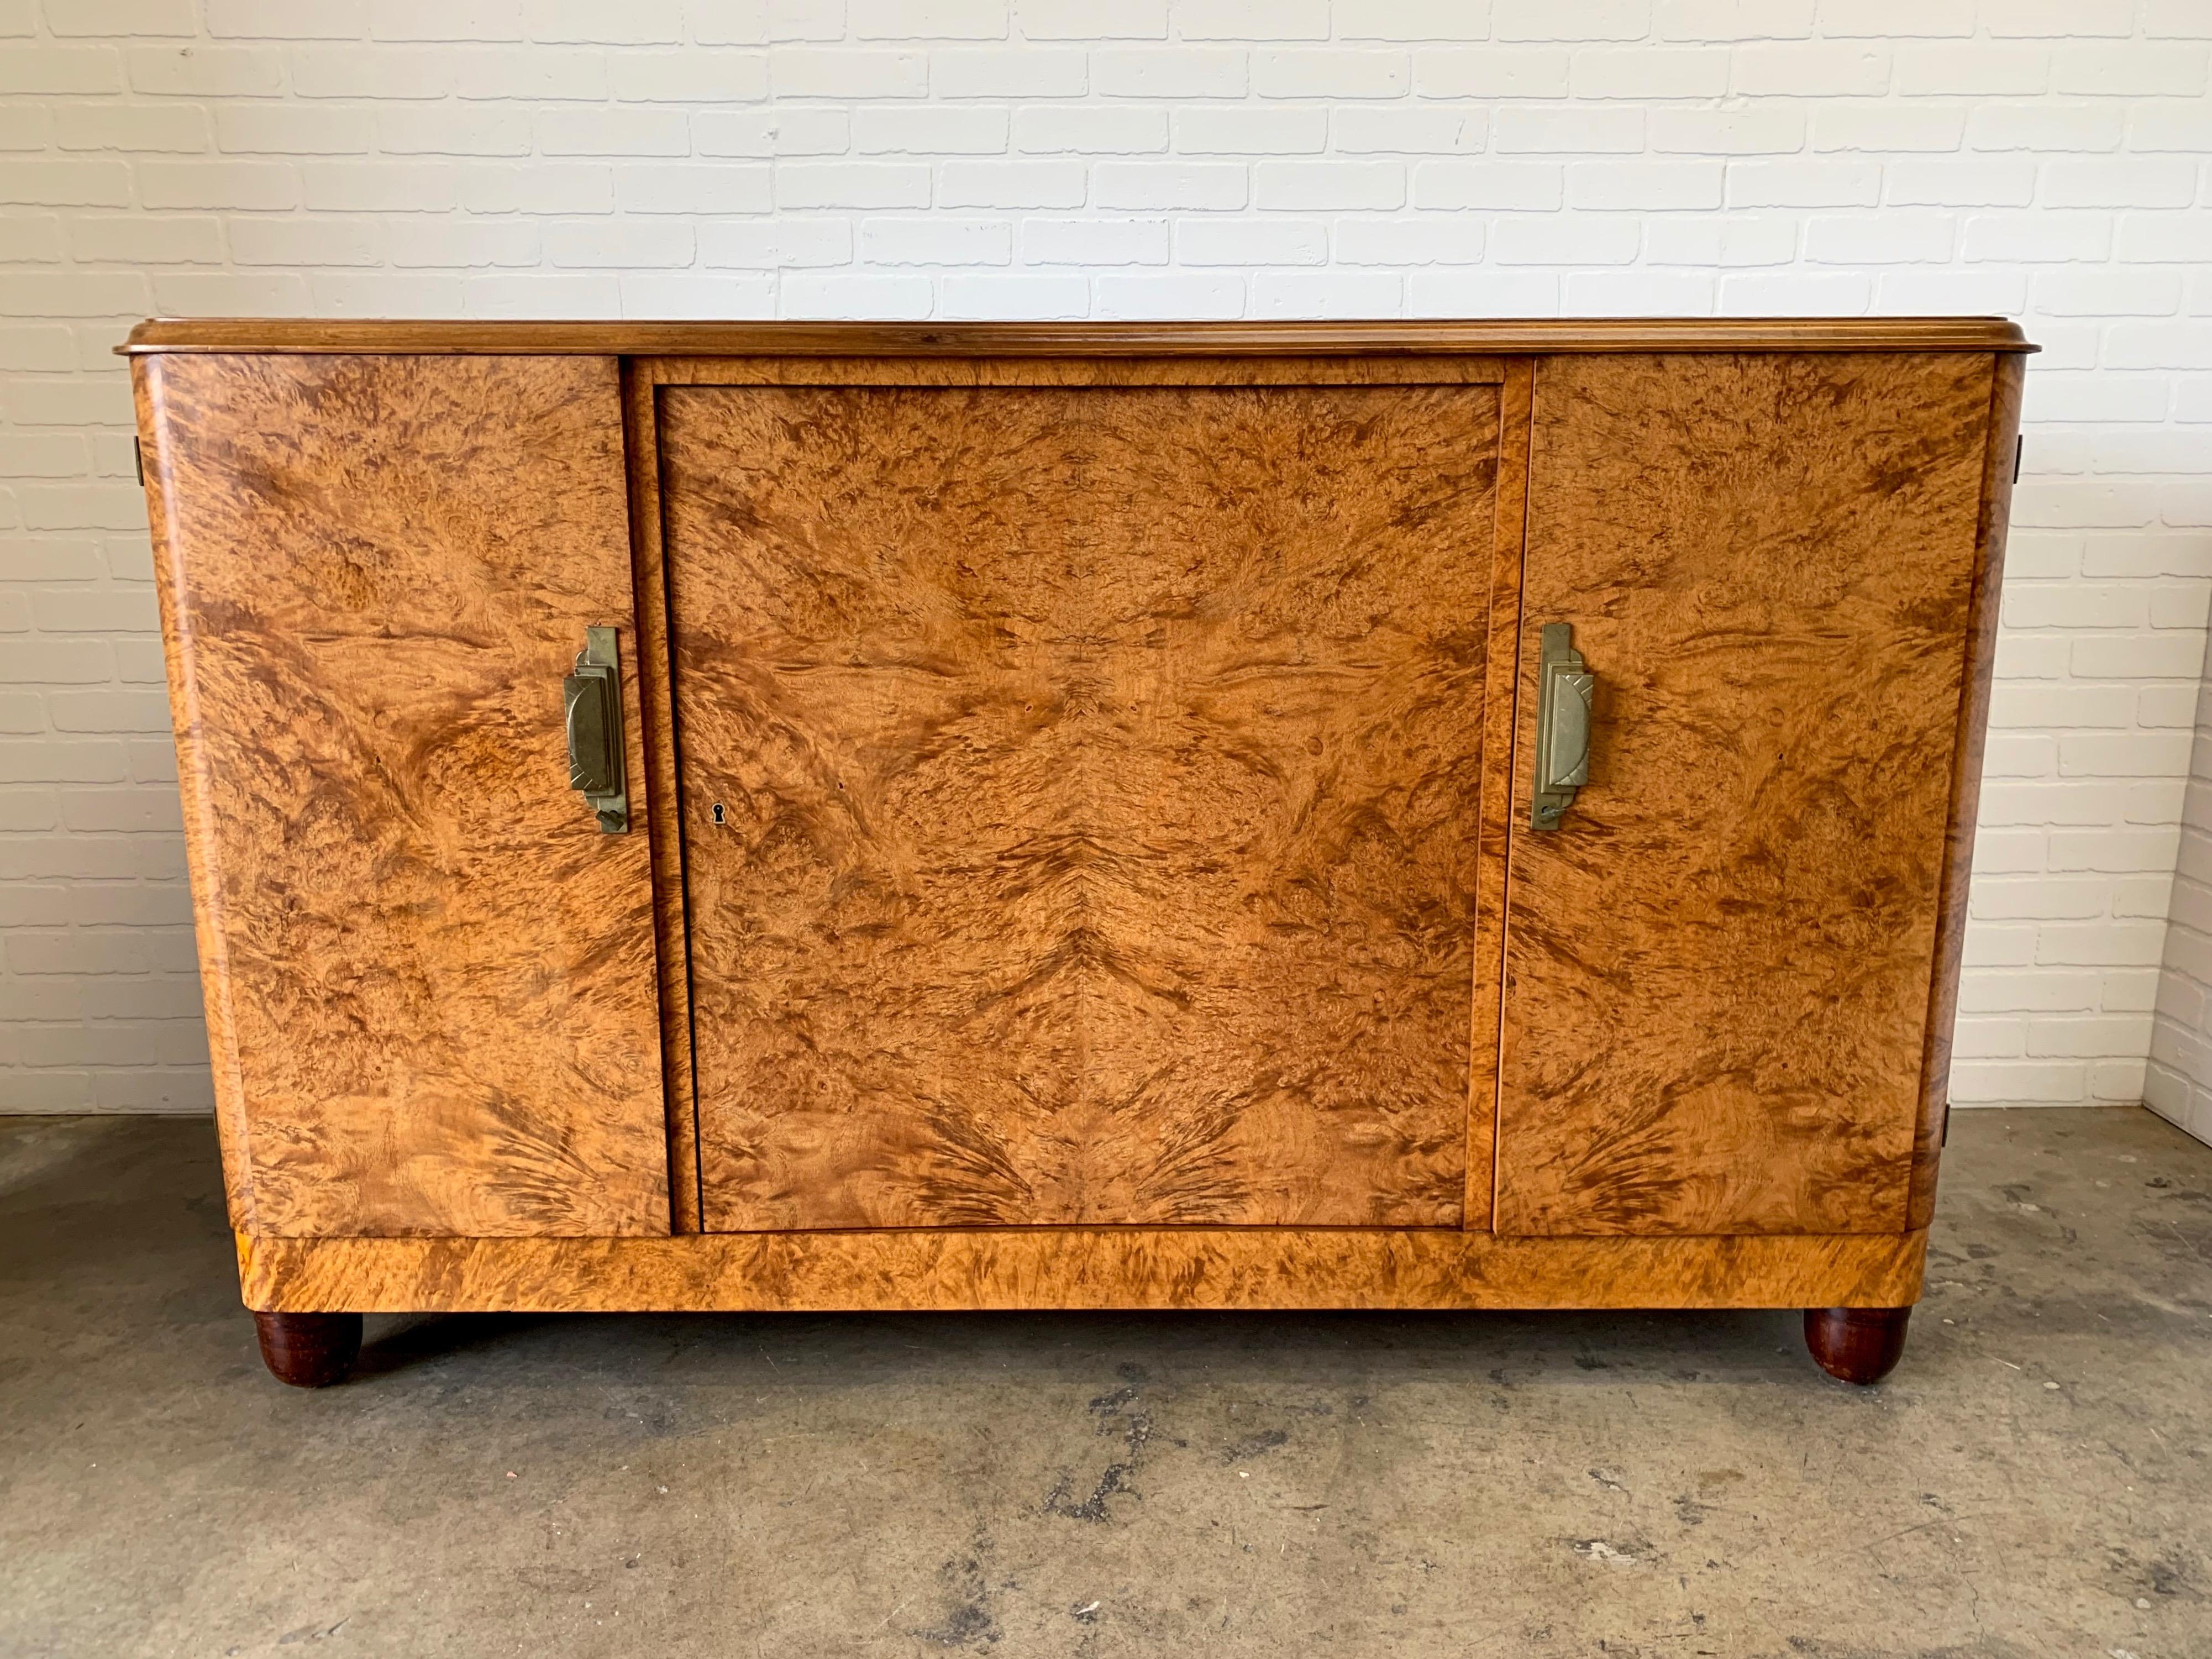 French Deco burl wood buffet with bronze hardware and black glass top
The shelf on the inside is adjustable to several heights also included is two original keys.